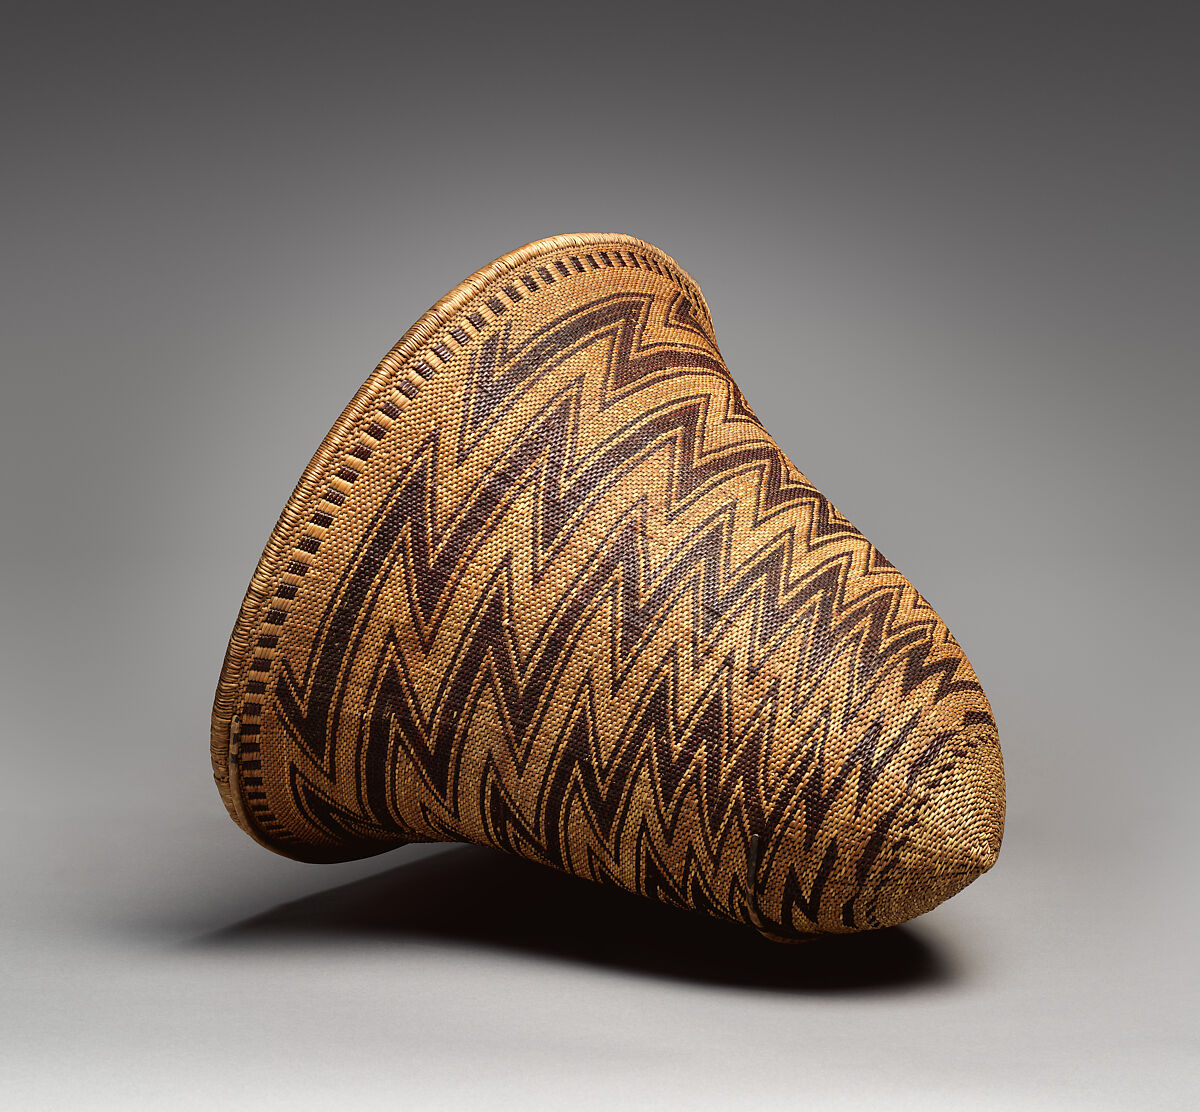 A photograph of a wicker basket made of tree shoots, woven with a zig zag pattern. 